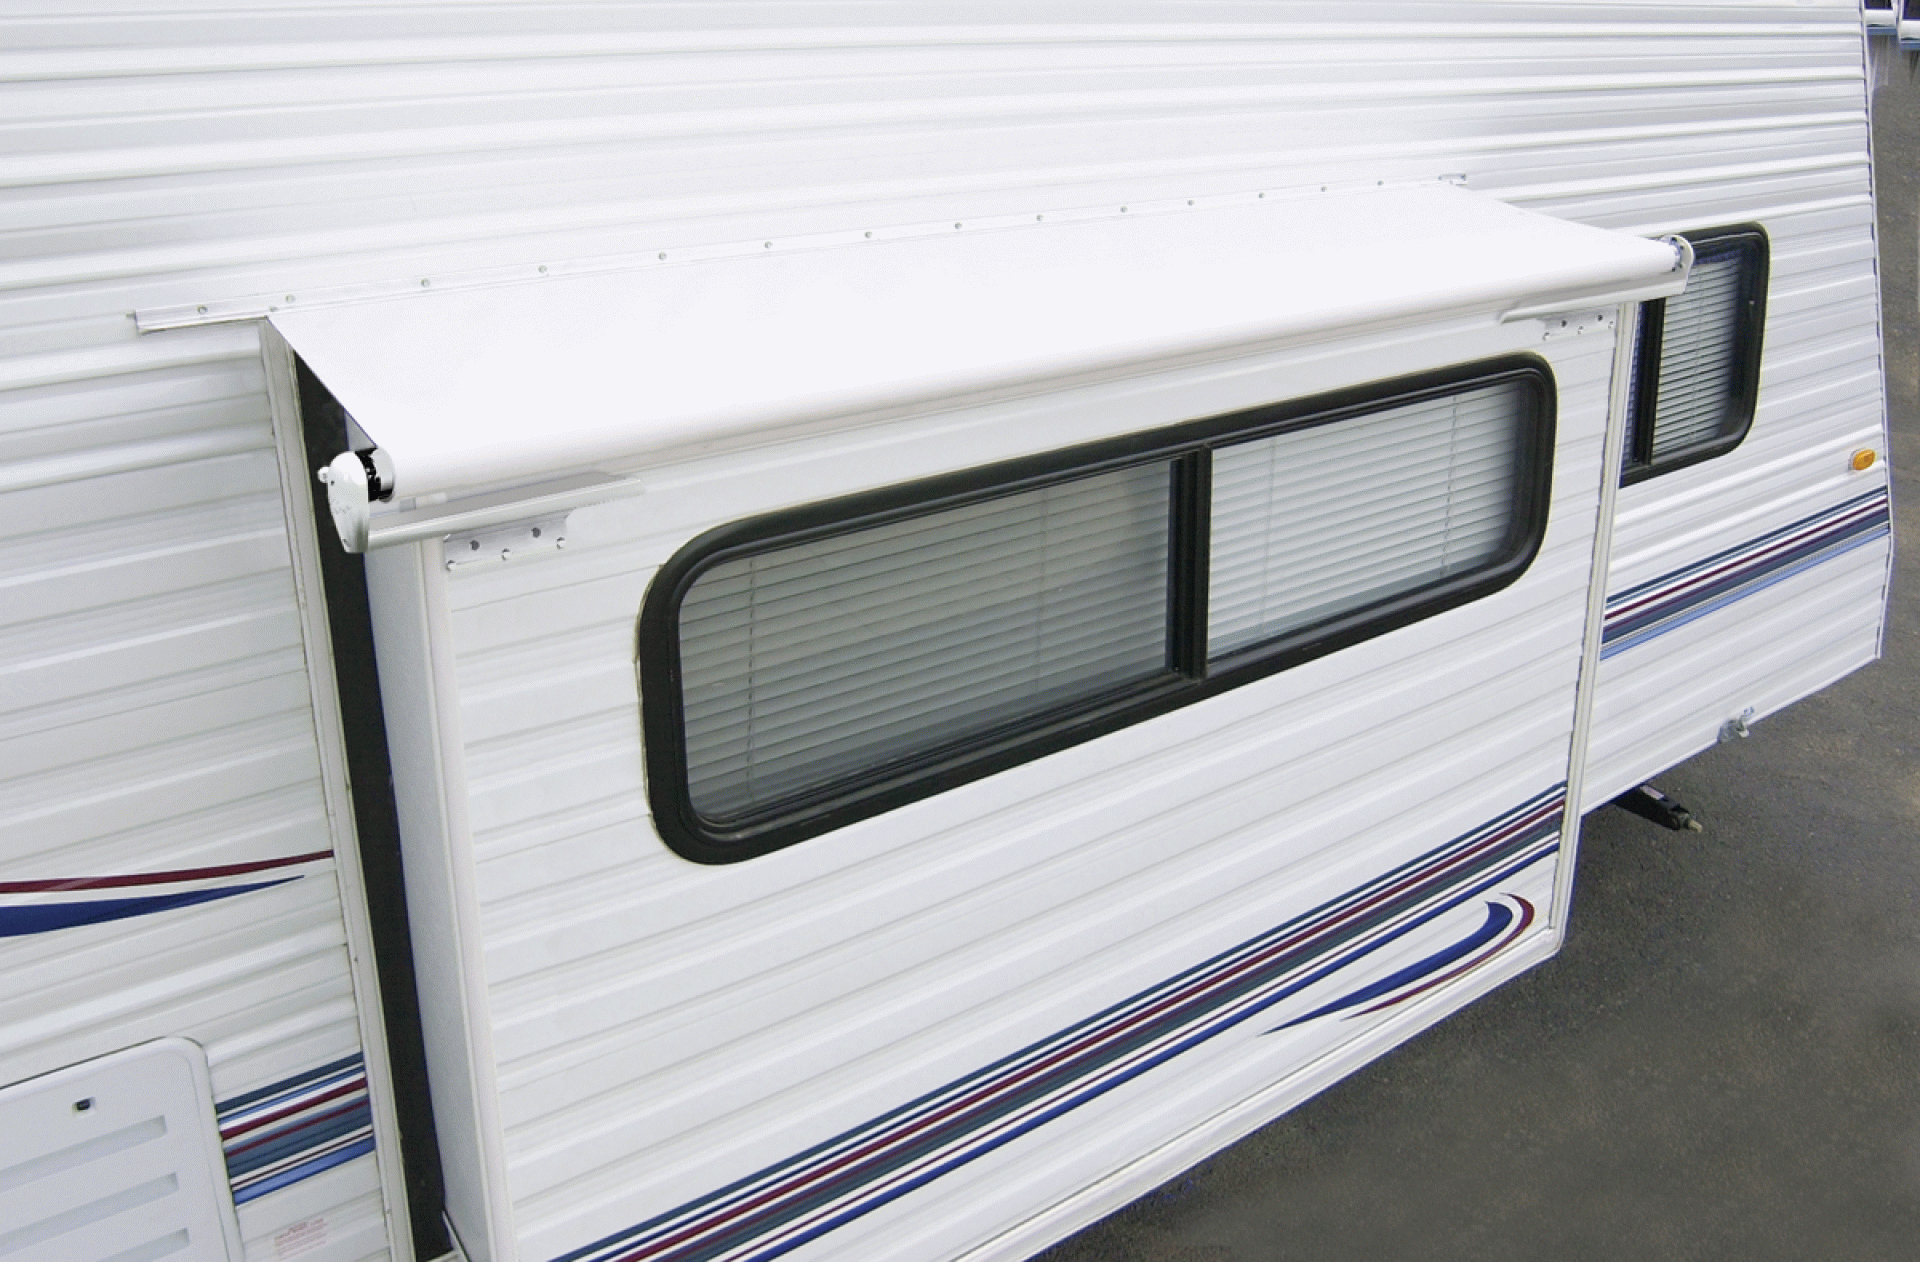 CAREFREE OF COLORADO | LH1850042 | SLIDEOUT COVER AWNING 178" - 185.9" ROOF RANGE WHITE VINYL